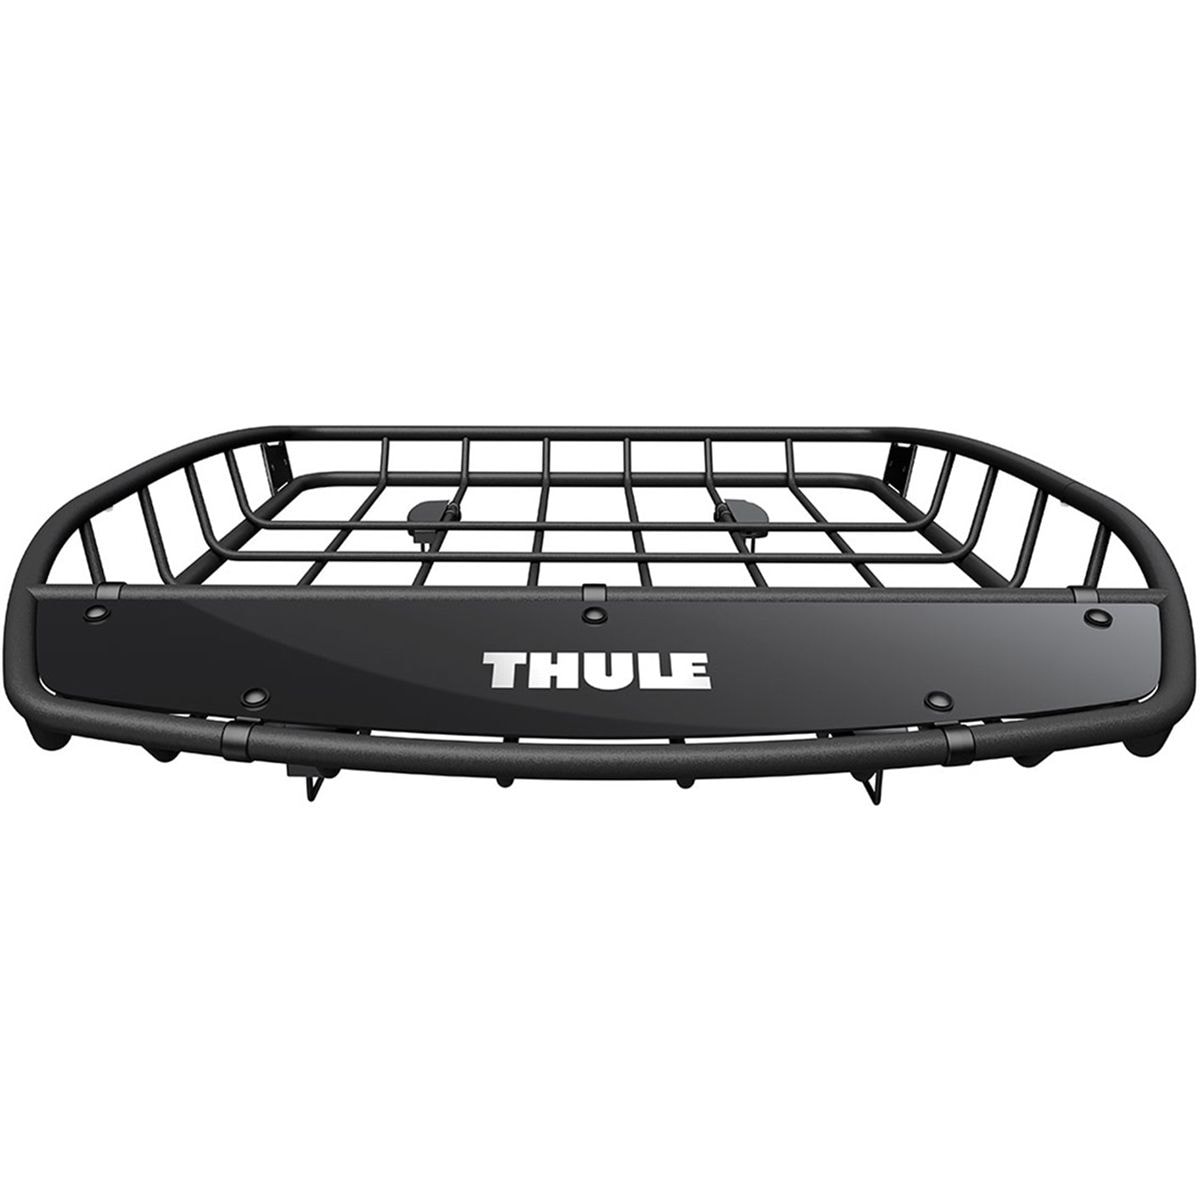 Thule 859002-Black-One Size